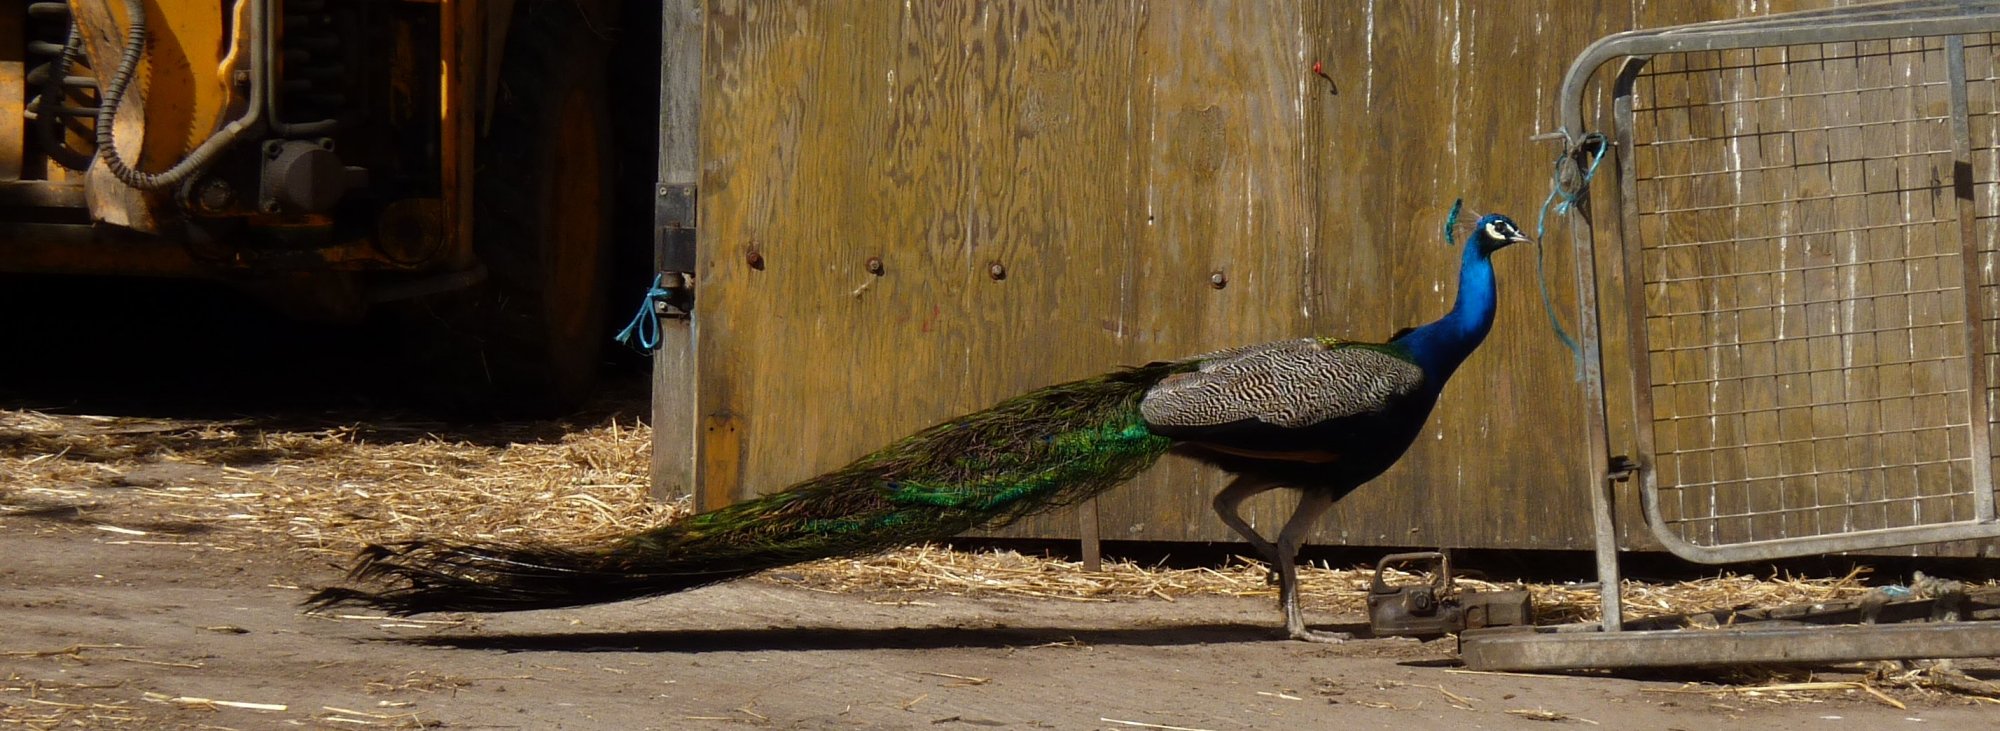 One of the many peacocks at Stoupebrow Cottage Farm